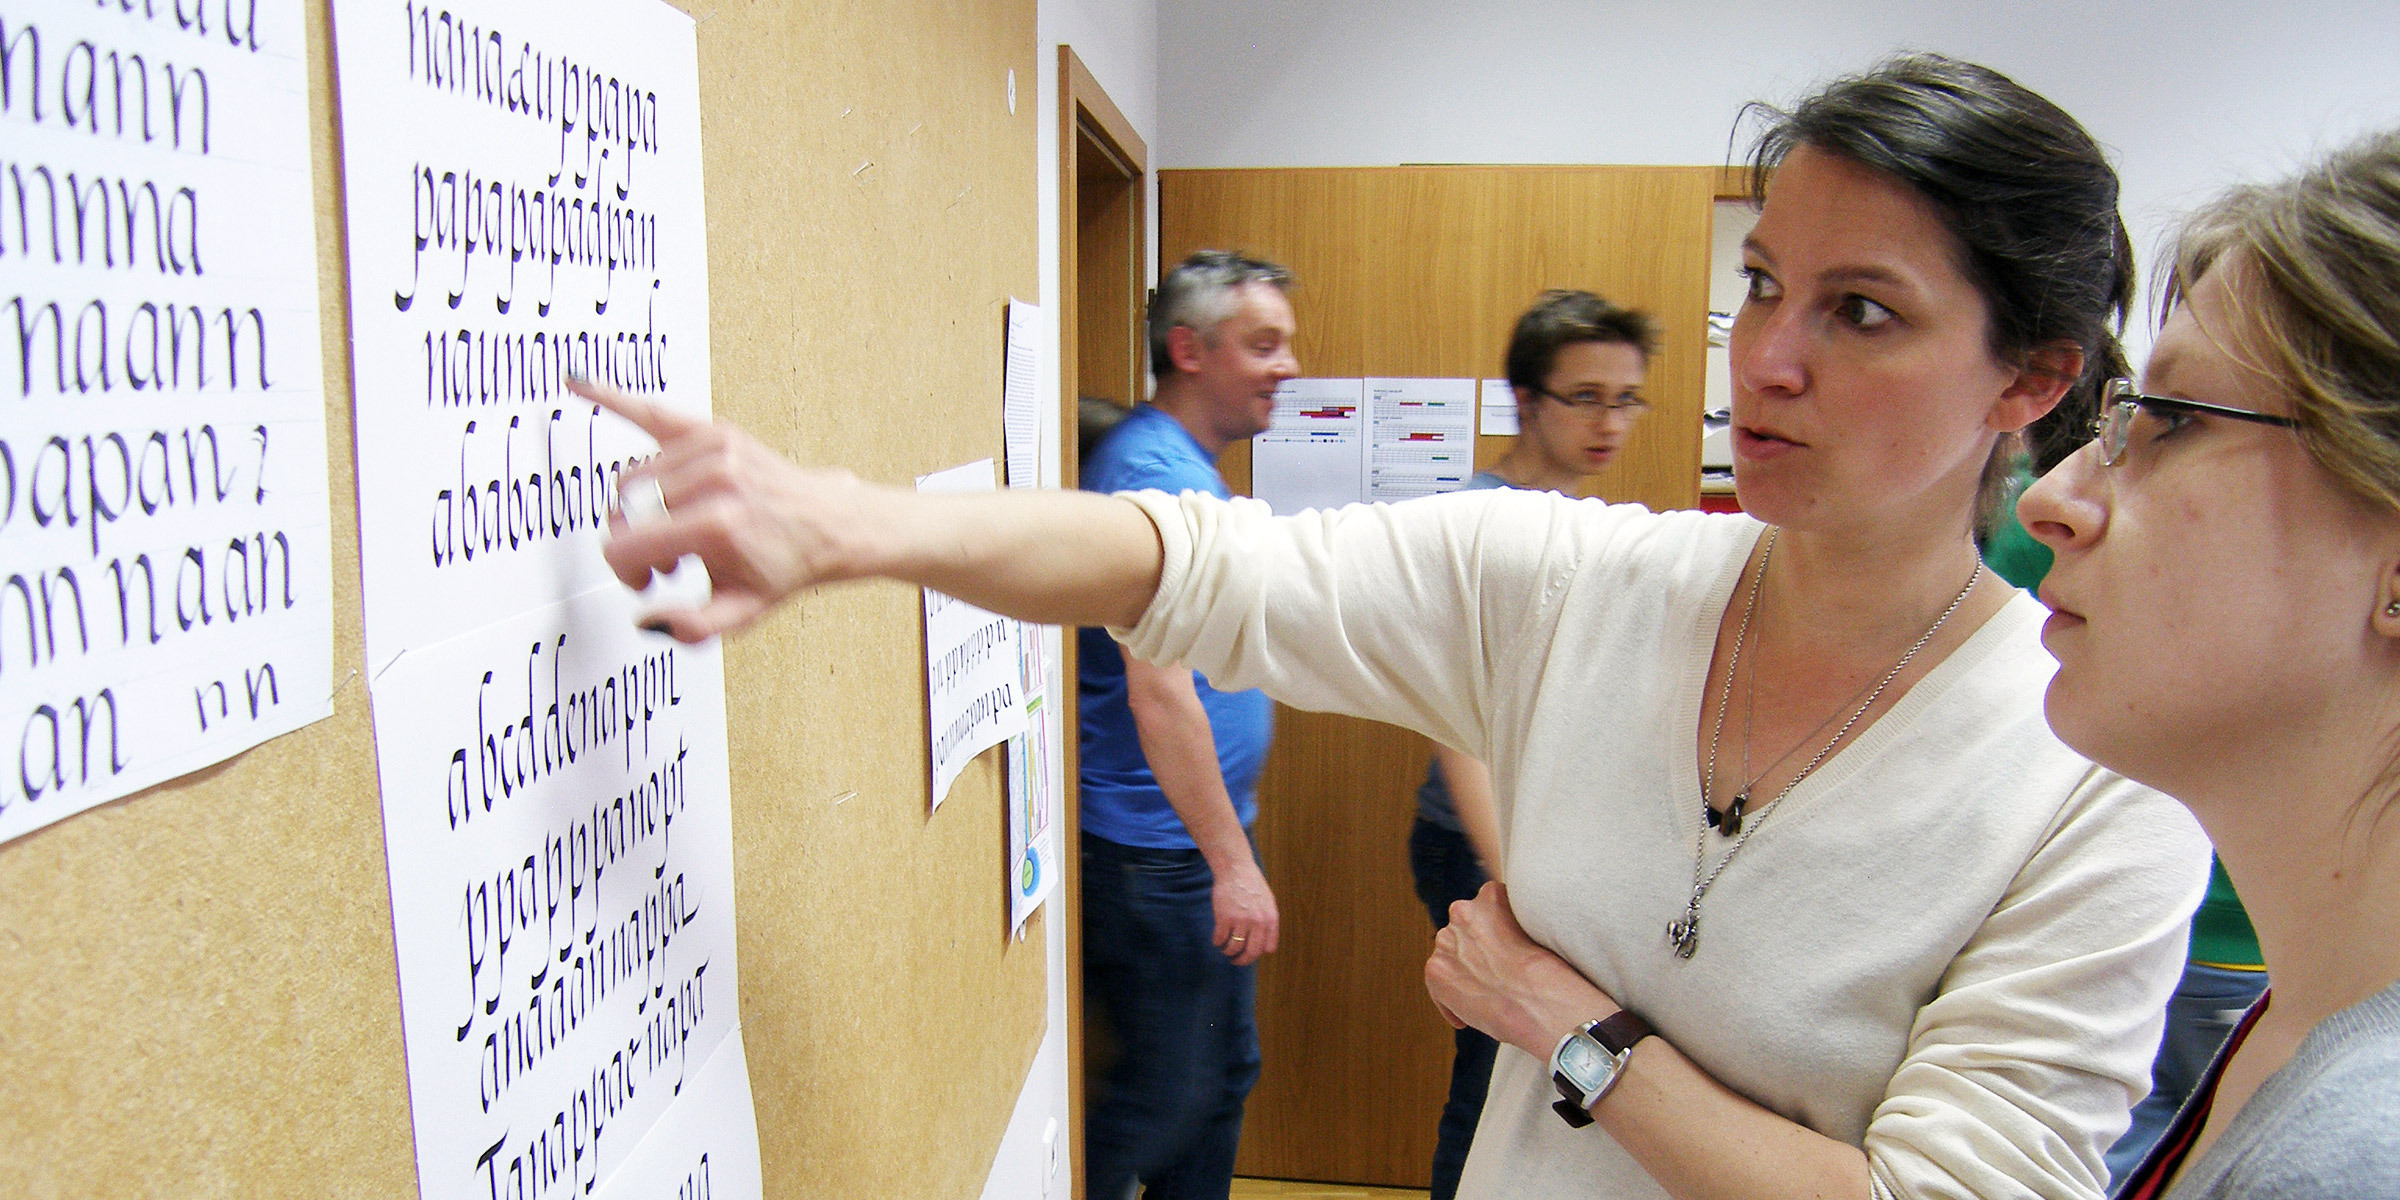 Verena Gerlach conducting the “Ala has a pen” type design workshop in Katowice, Poland in 2012. Photo by Bogna Kowalska